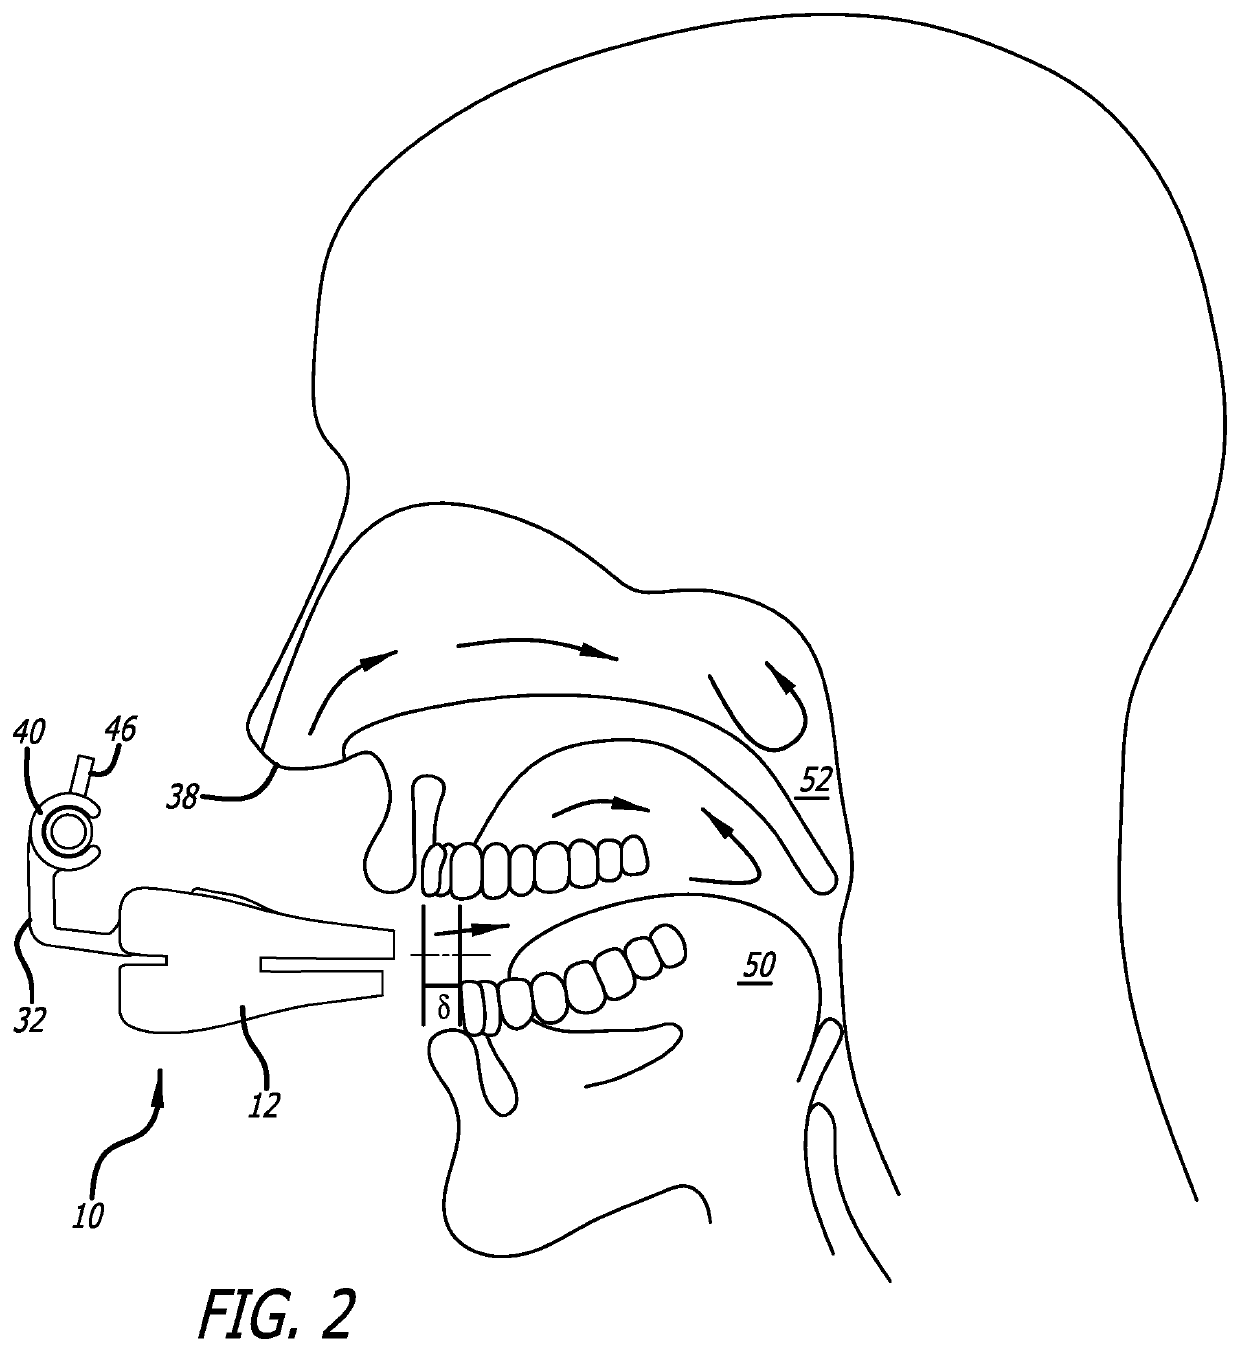 Dental appliance using airway dialation for treating covid related breathing disorders